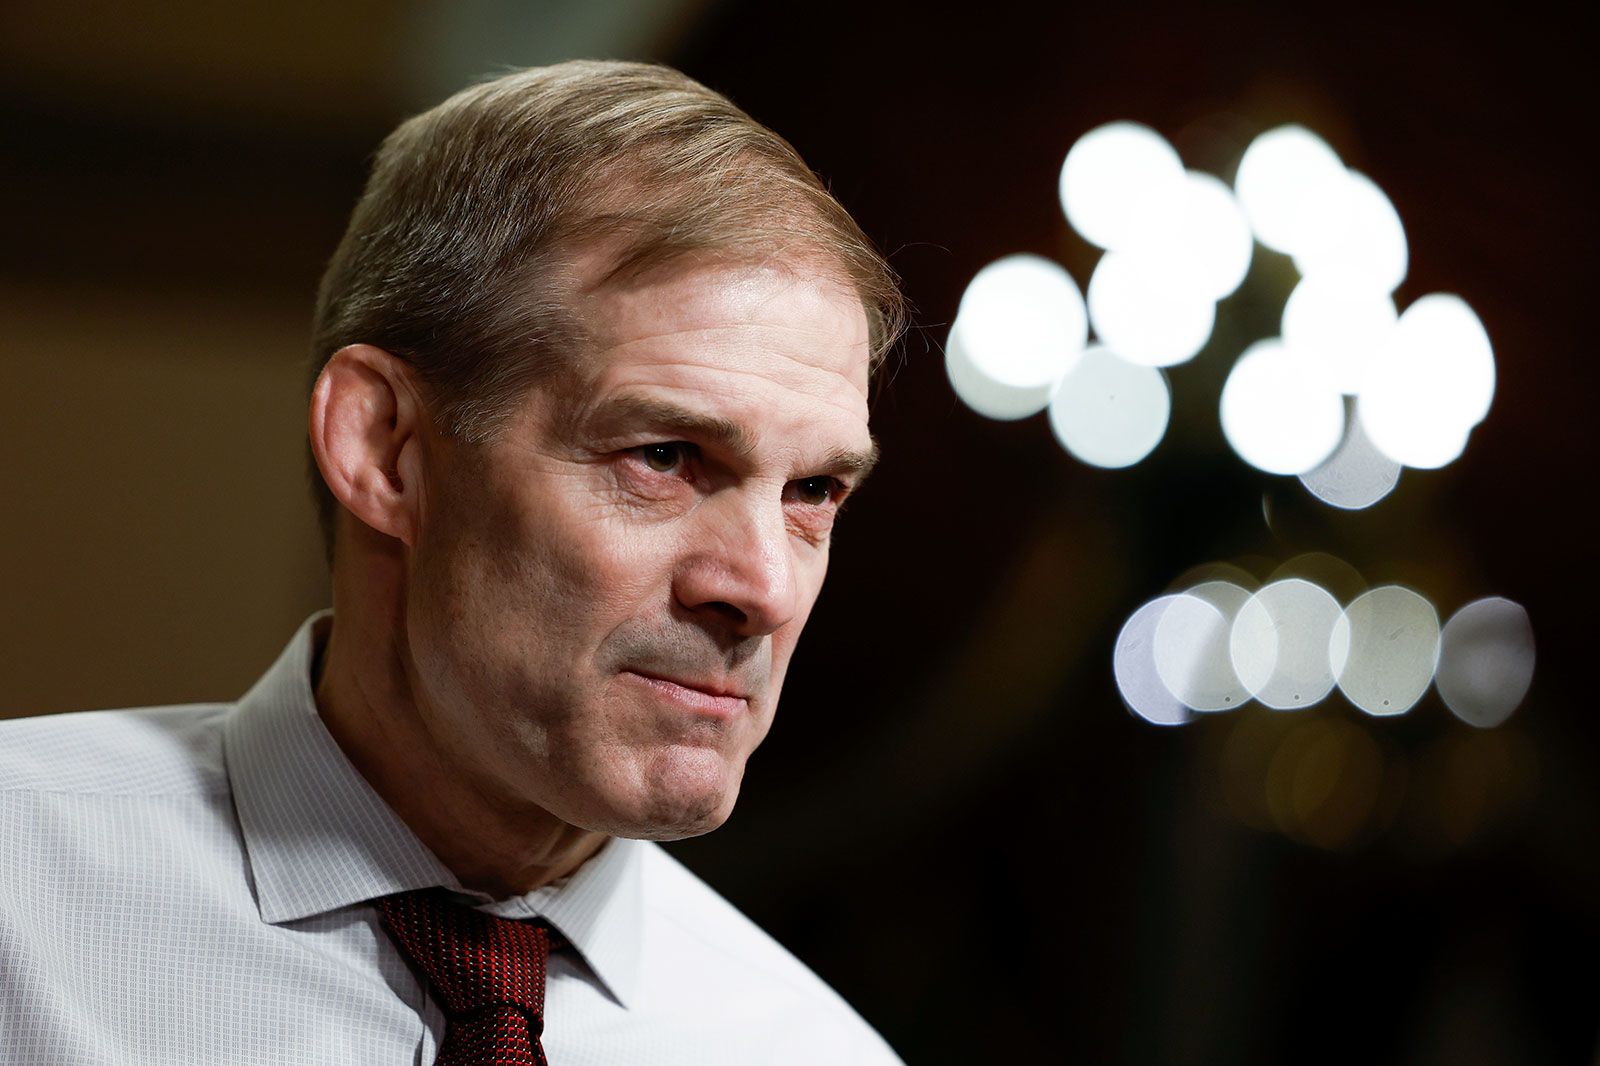 Rep. Jim Jordan is known as a staunch ally of former President Donald Trump and serves as chairman ...